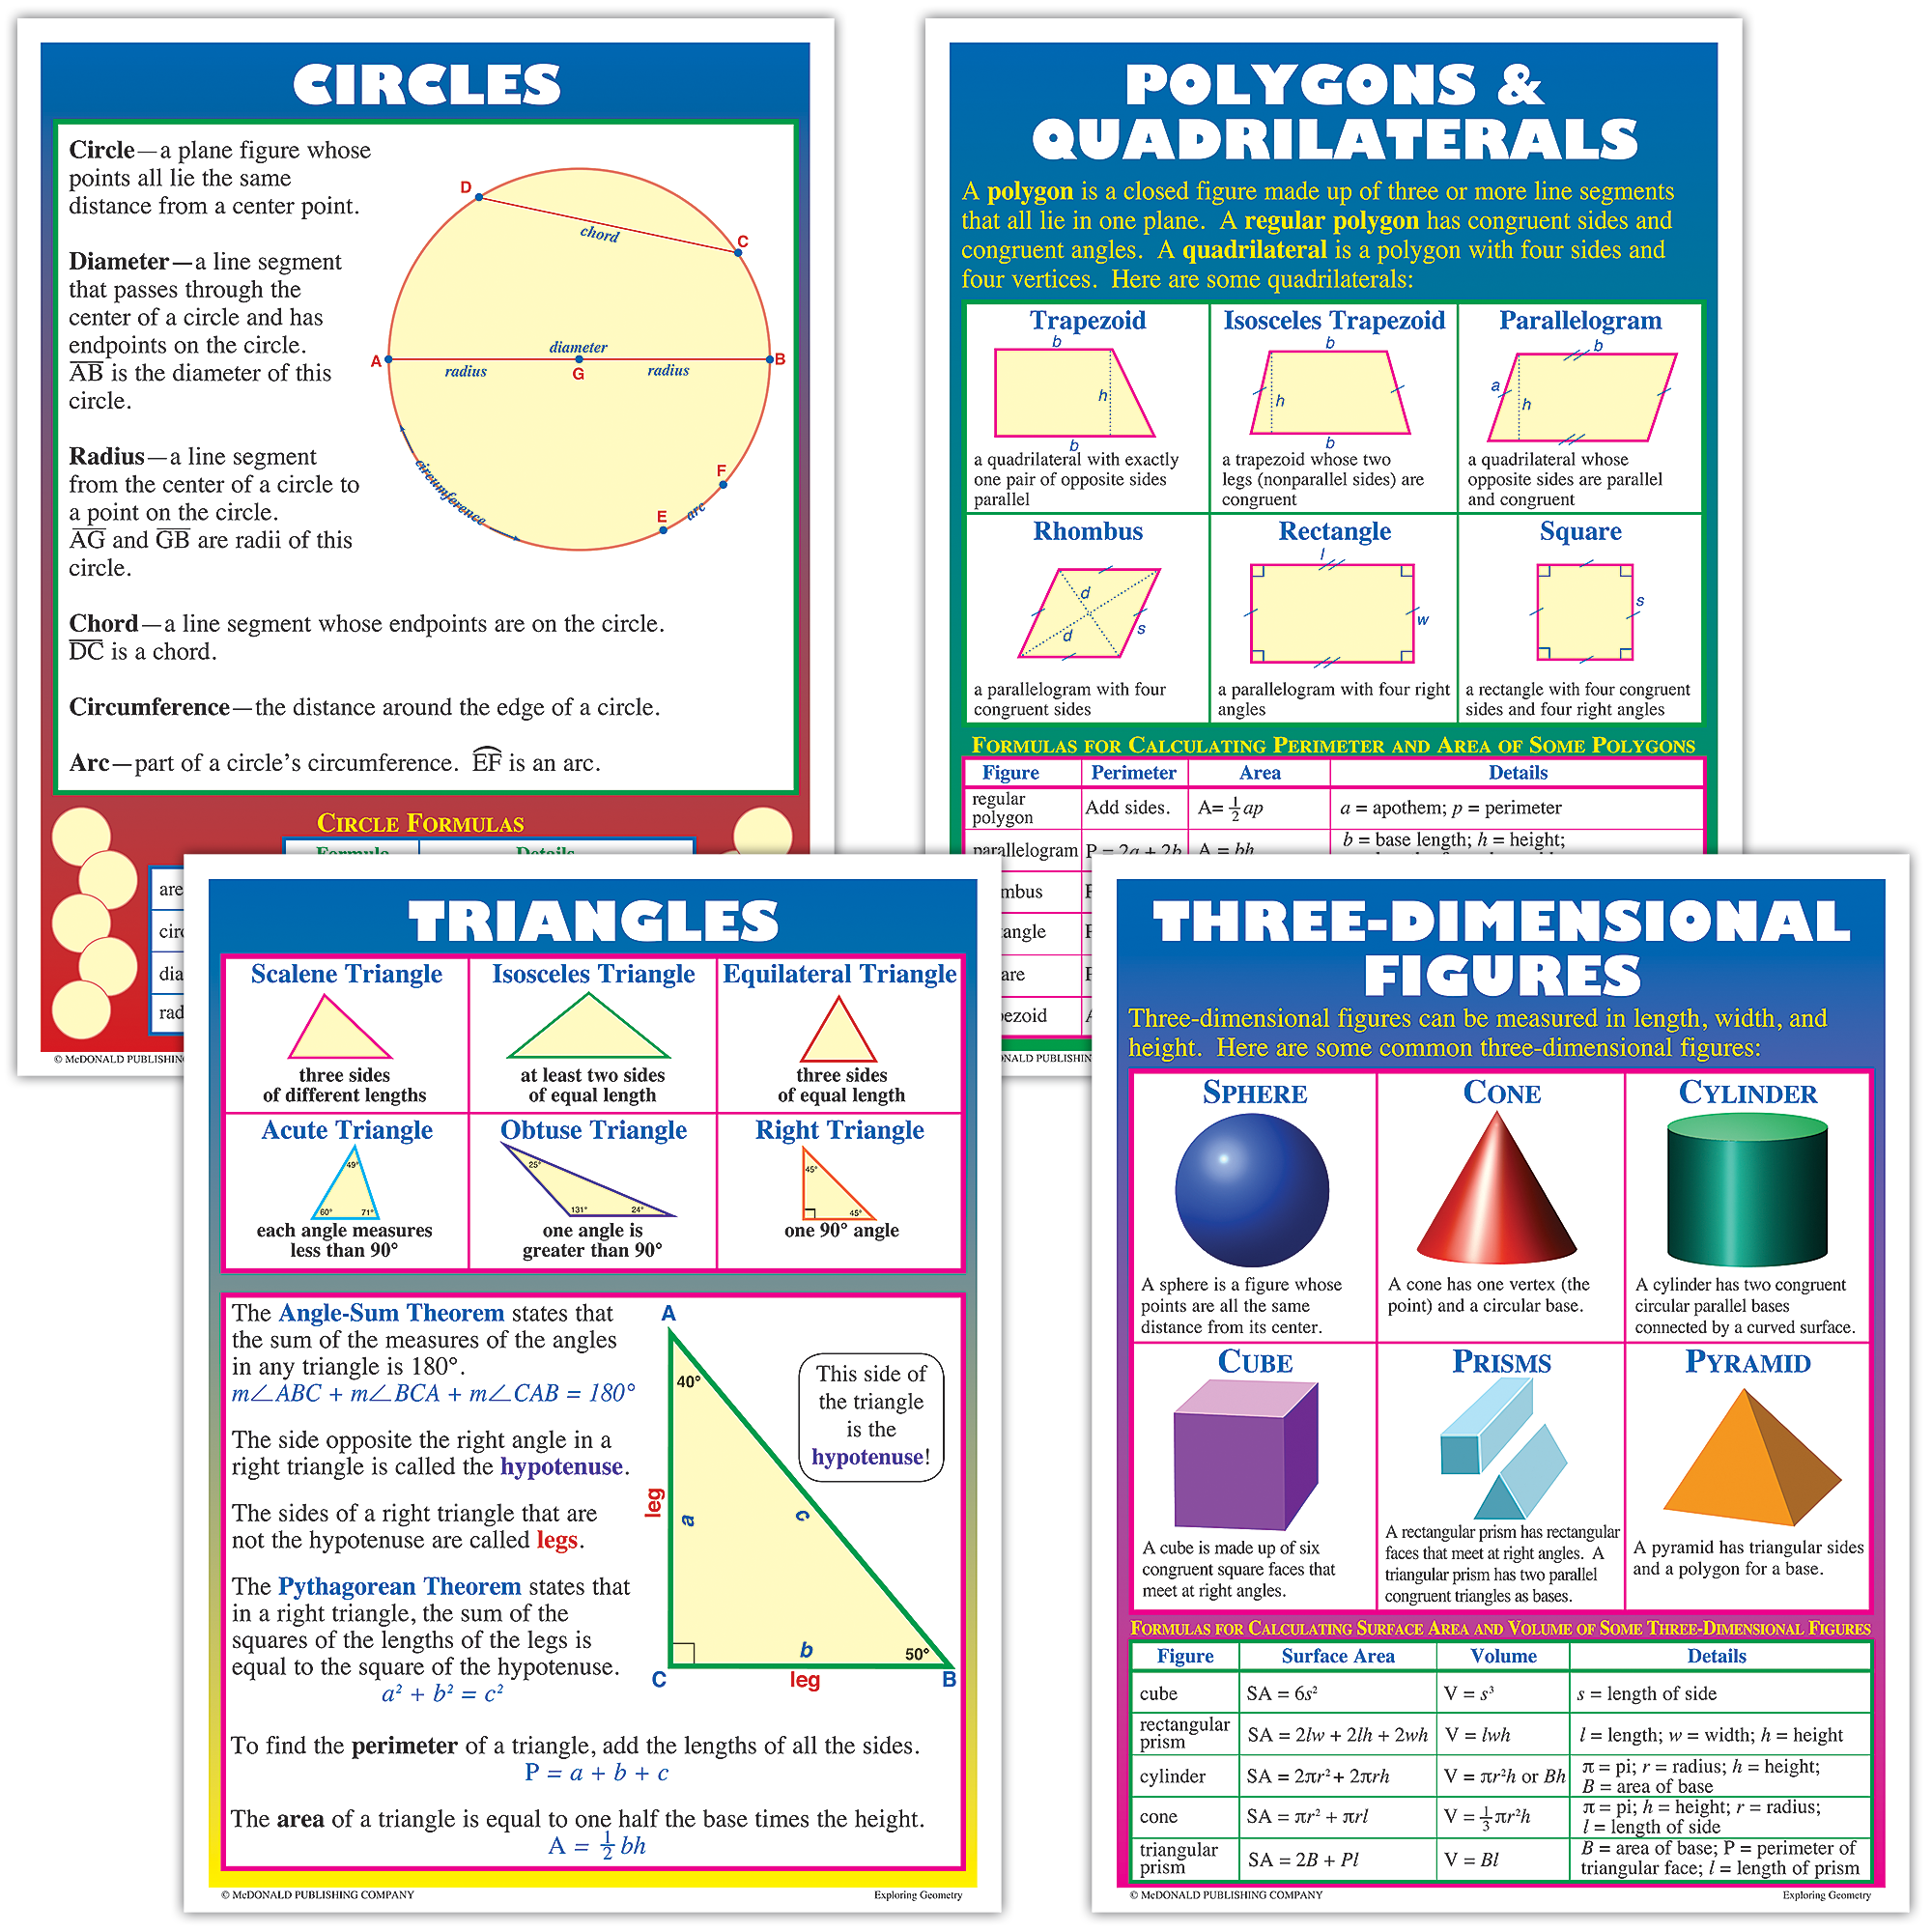 These colorful posters will enhance your lessons on three-dimensional figures, triangles, polygons, quadrilaterals, and circles. Package includes 4 posters, 4 reproducible activity sheets, and a teacher’s guide.